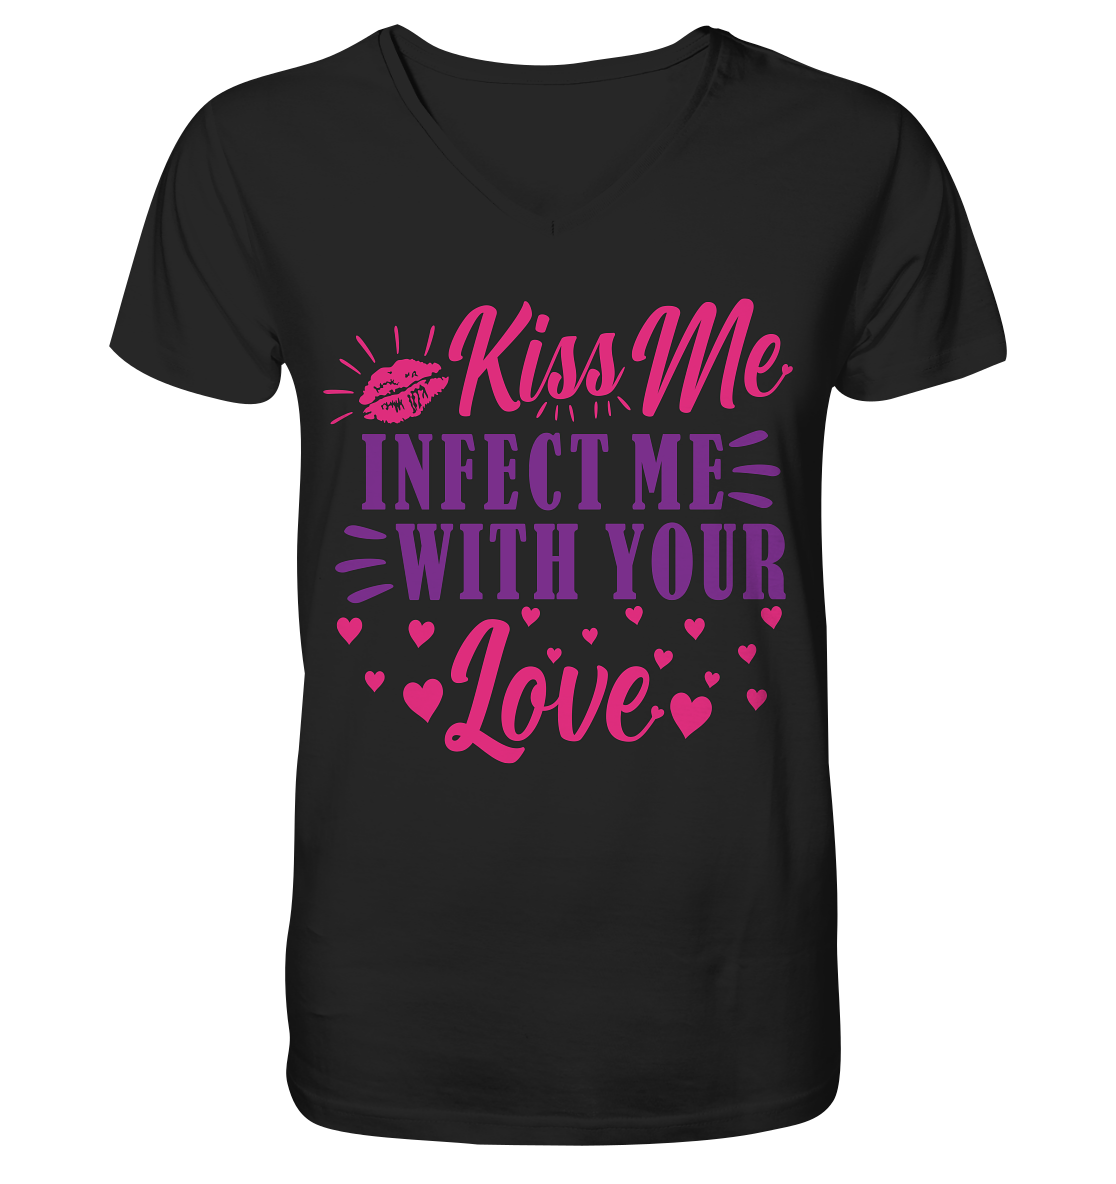 Kiss me infect me with your love - V-Neck Shirt